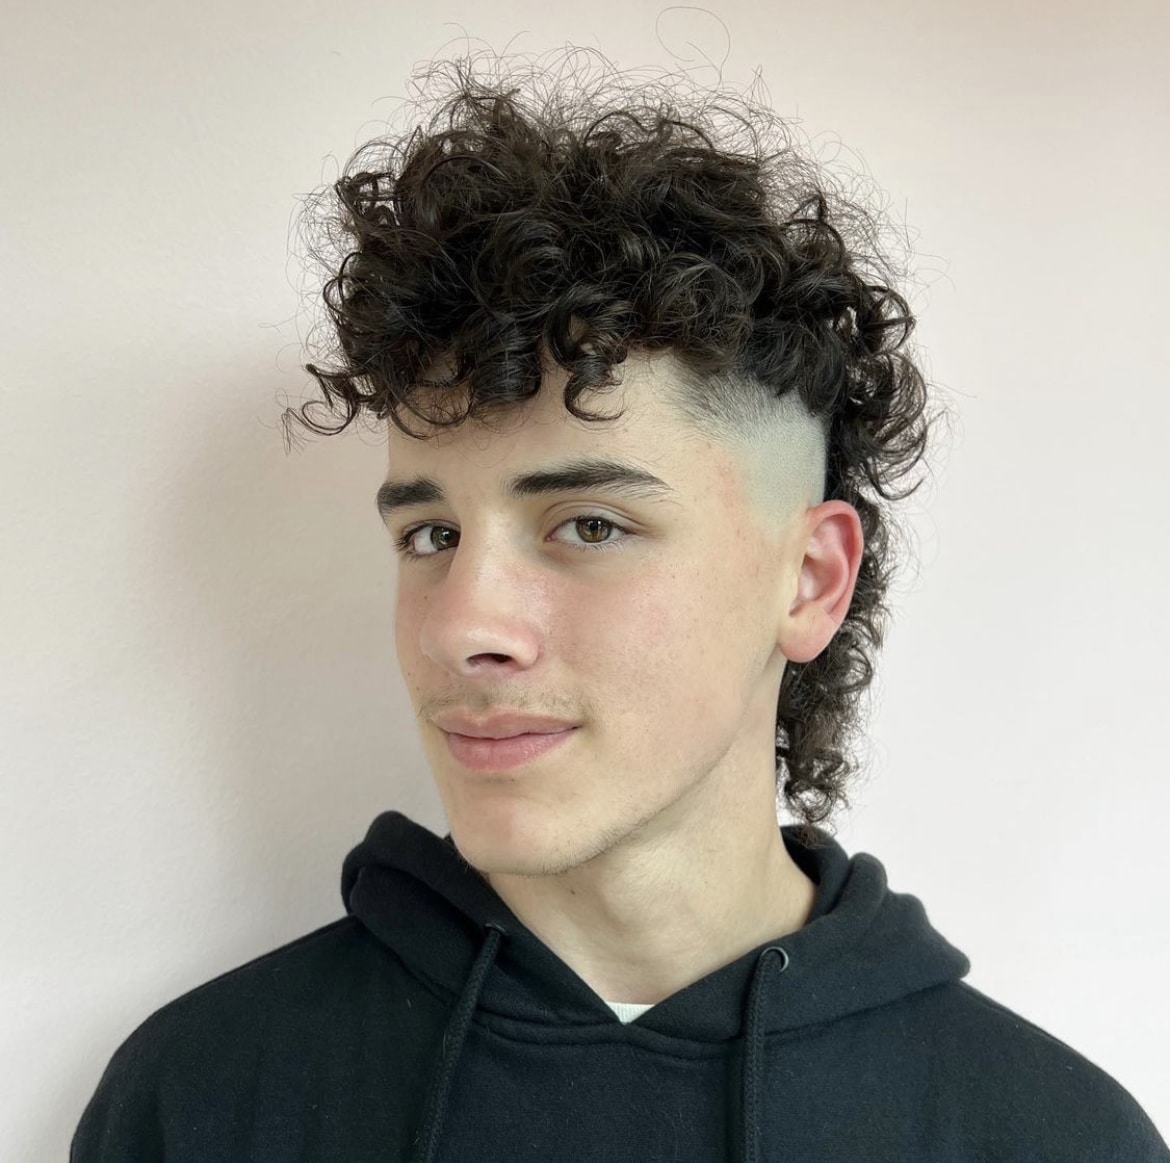 temp fade curly afro